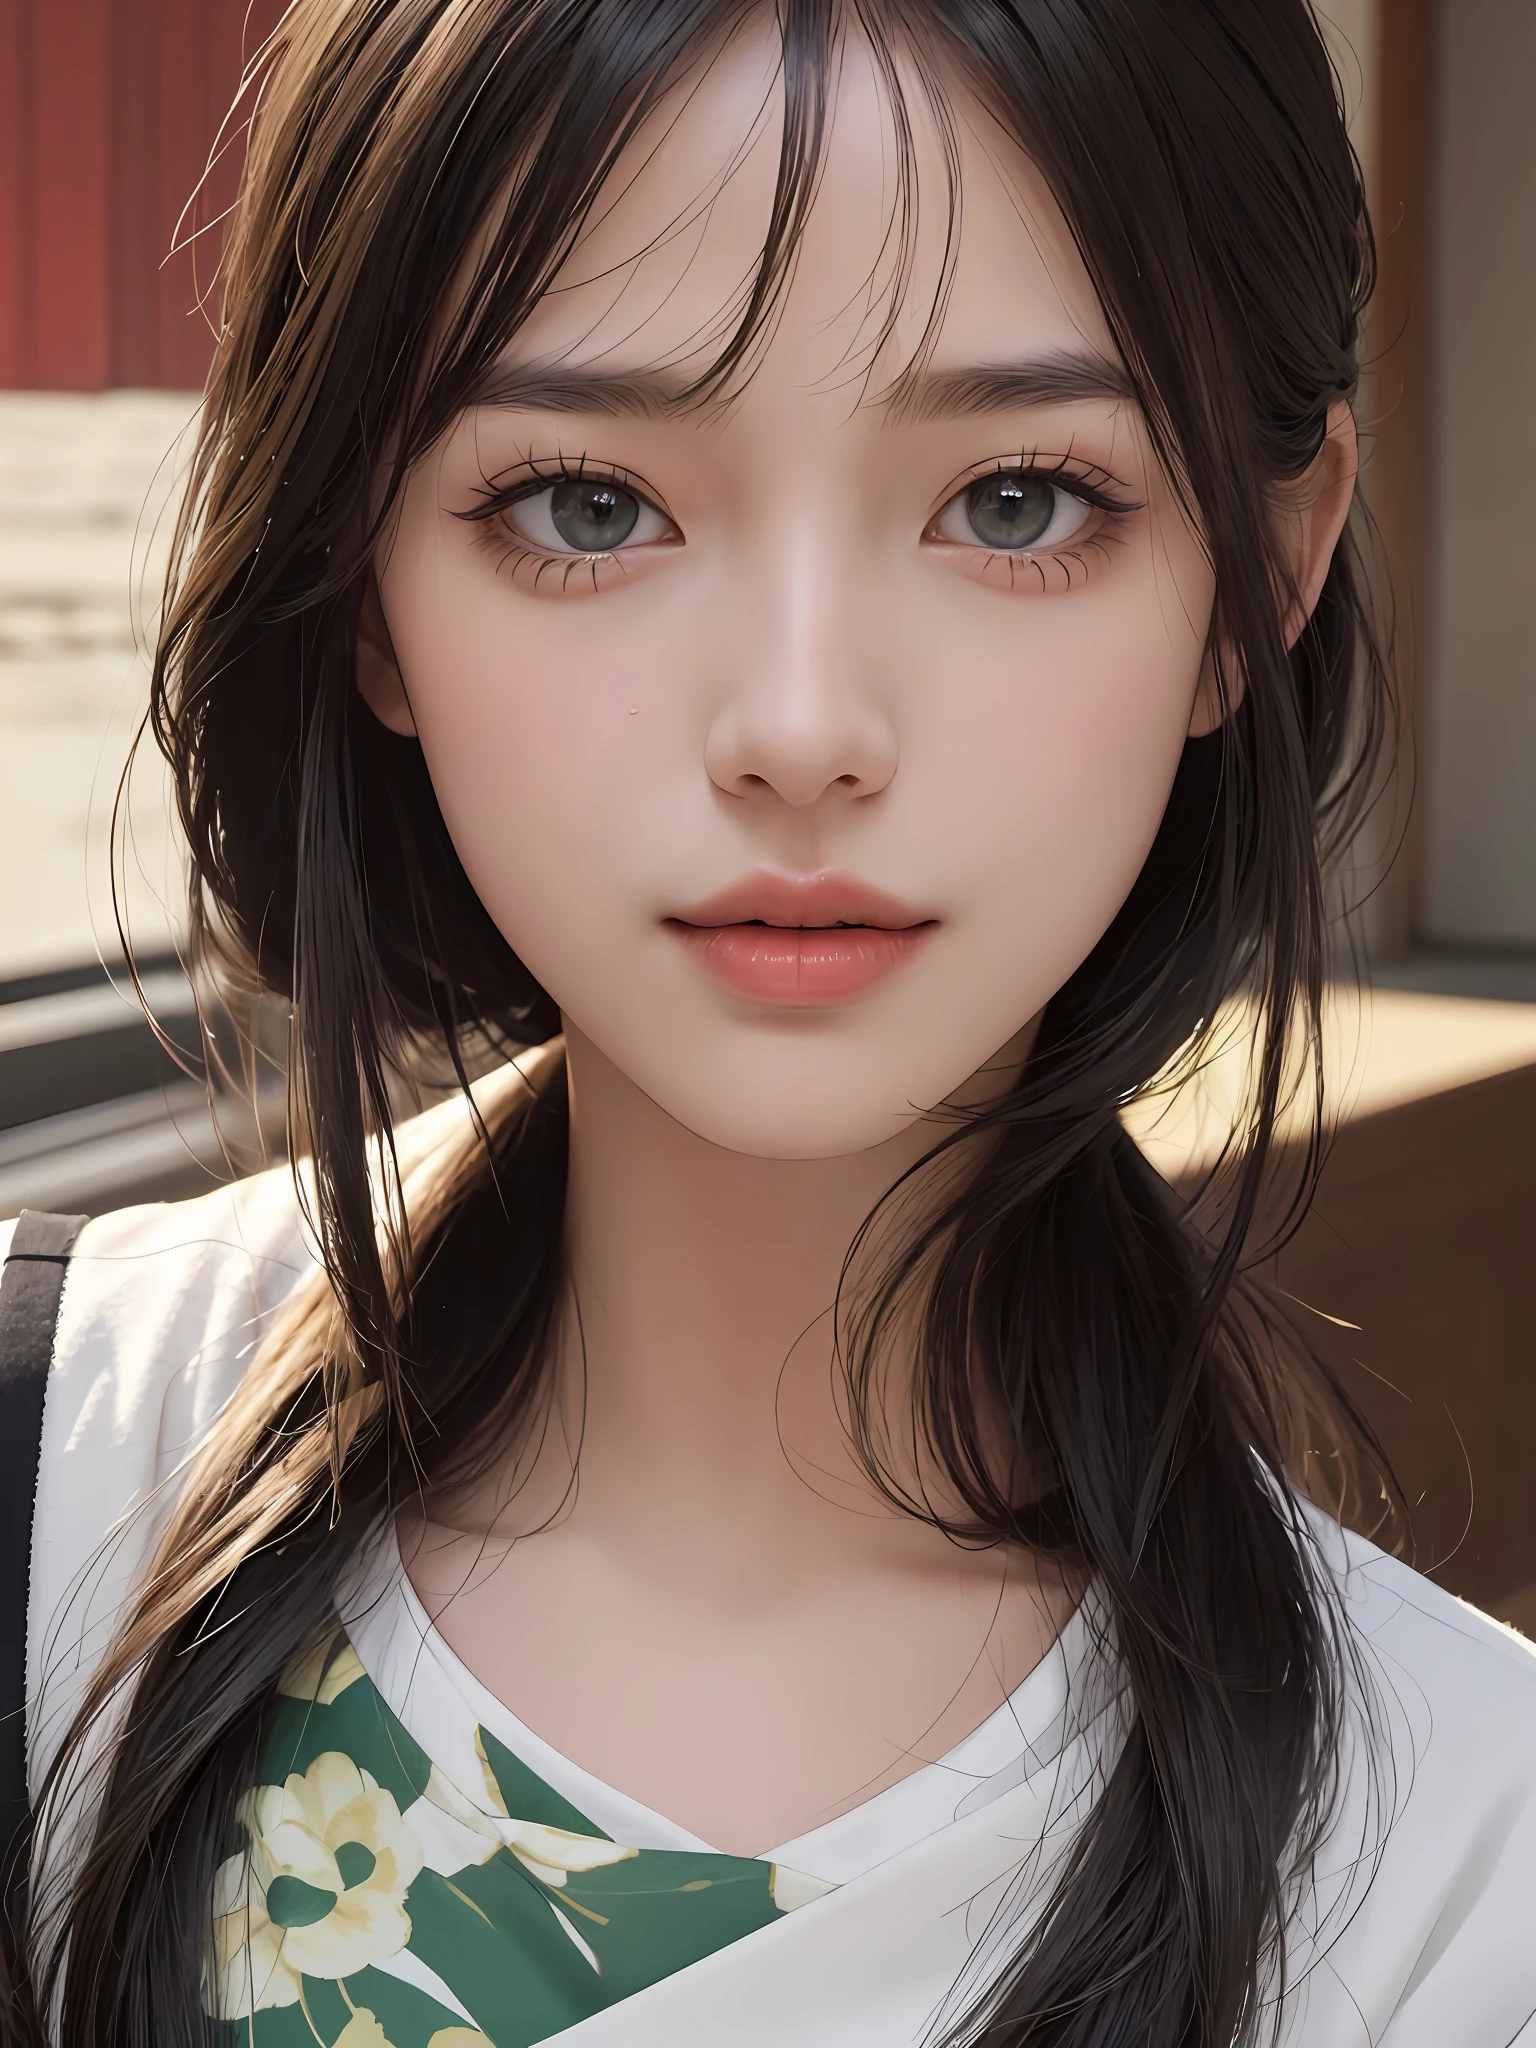 masterpiece, best picture quality, high quality, beautiful girl, Japanese, Japanese school girl, popular Korean makeup, detailed, swollen eyes, detailed eyes, detailed skin, beautiful skin, ultra high resolution, (reality: 1.4), very beautiful, slightly younger face, beautiful skin, slender, (ultra realistic), (illustration), (high resolution), (8K), (highly detailed), (best illustration), (beautifully detailed eyes), (super detailed), (wallpaper), (detailed face), looking at viewer, fine details, detailed face, pureerosfaceace_v1, smiling, looking straight ahead, looking straight ahead, angle from waist up, realistic photo, bright lighting, professional lighting, black hair (some green), long hair, dark ruins, big red moon, gorgeous red and black dress, mature woman, long stylish bangs,